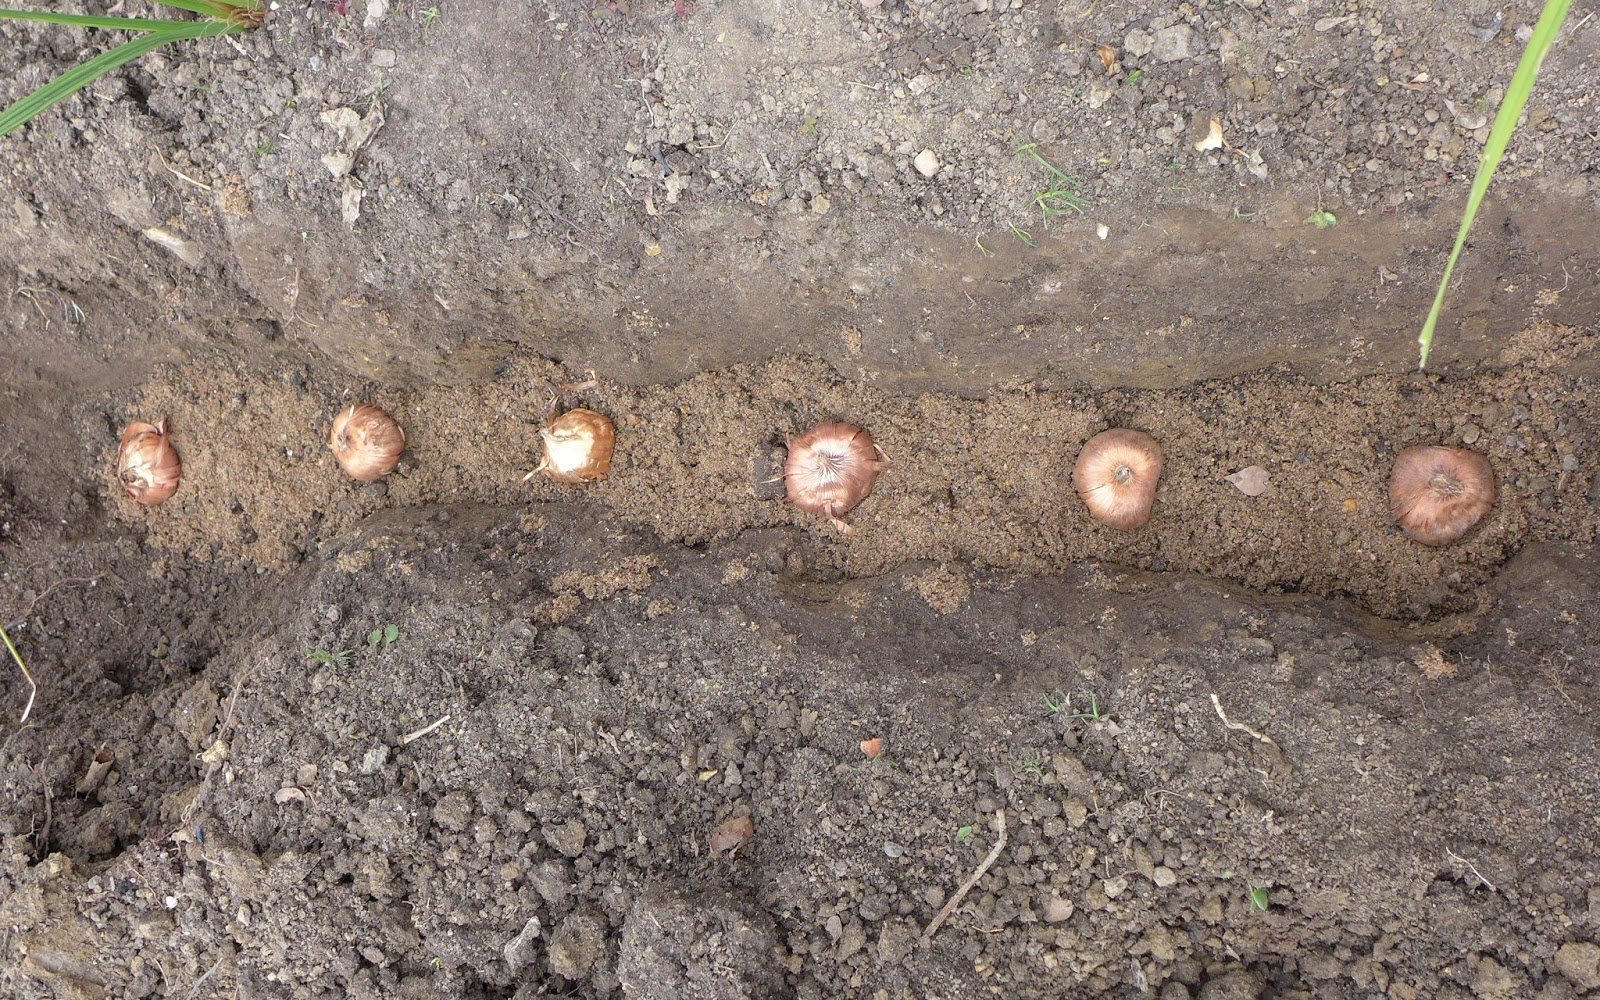 Basicallyitsgrowing: Excessive gladiolus bulb planting - a ...